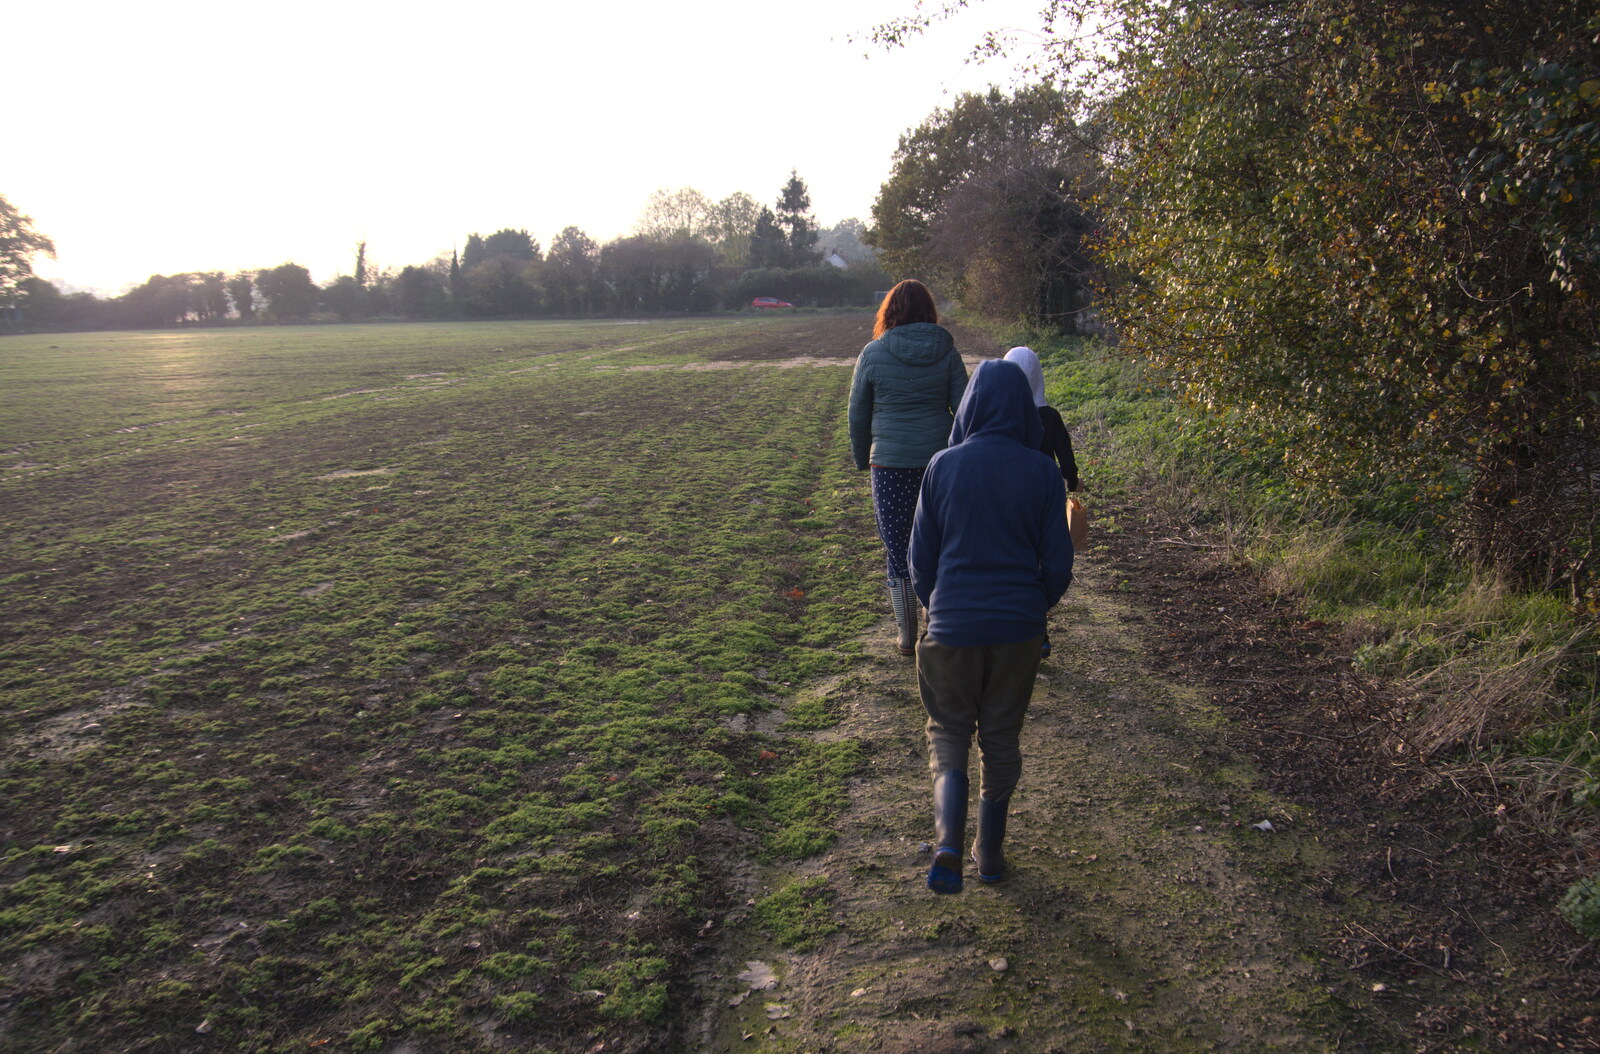 Walking around the side field from To See the Hairy Pigs, Thrandeston, Suffolk - 7th November 2020